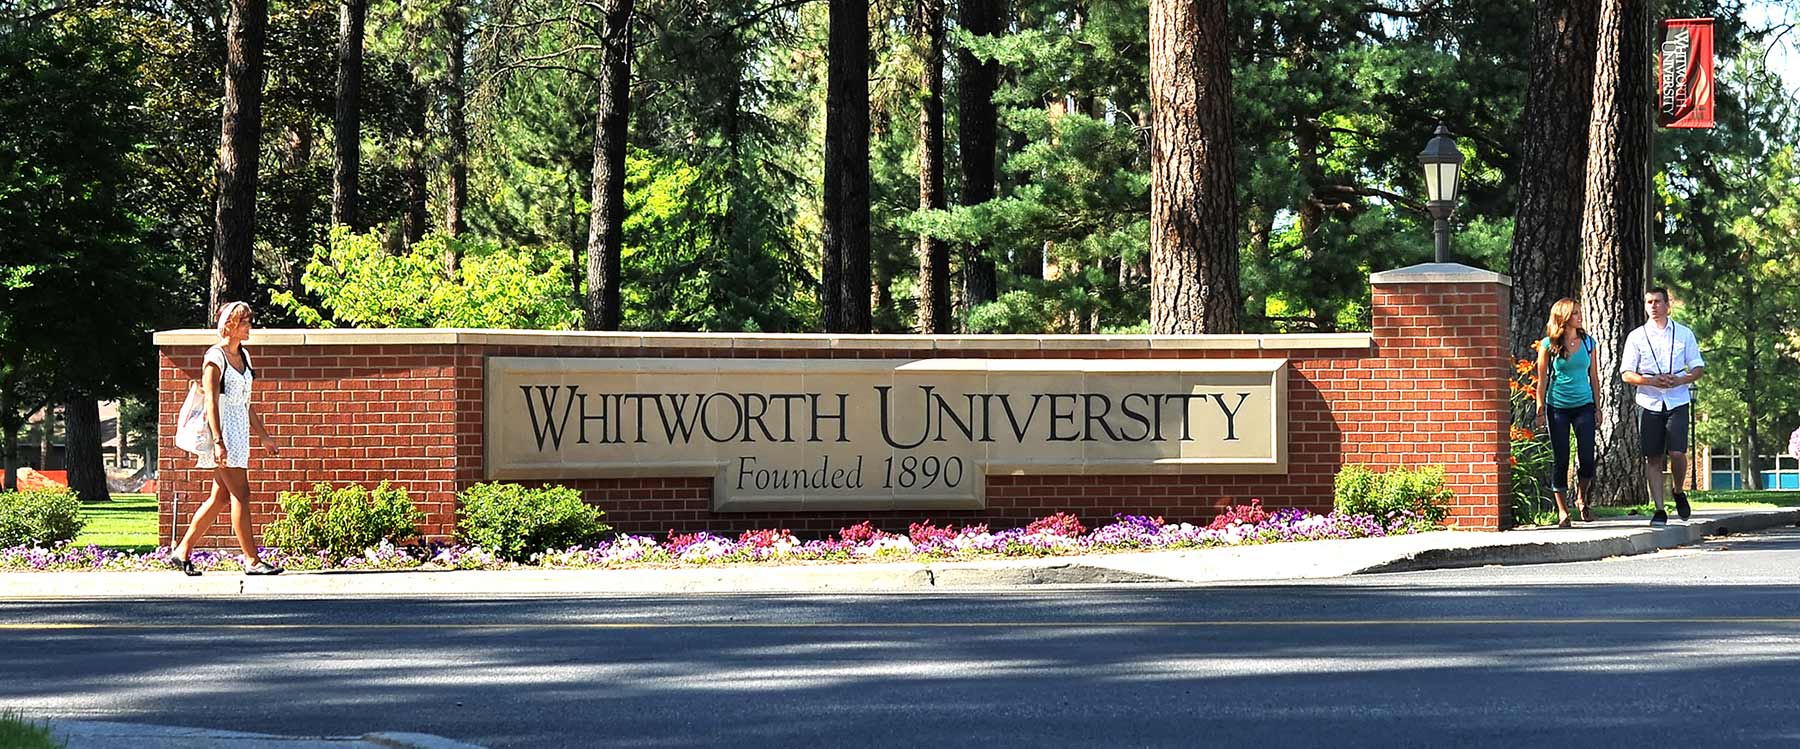 Students walk on the sidewalk on either side of the brick Whitworth entrance sign.